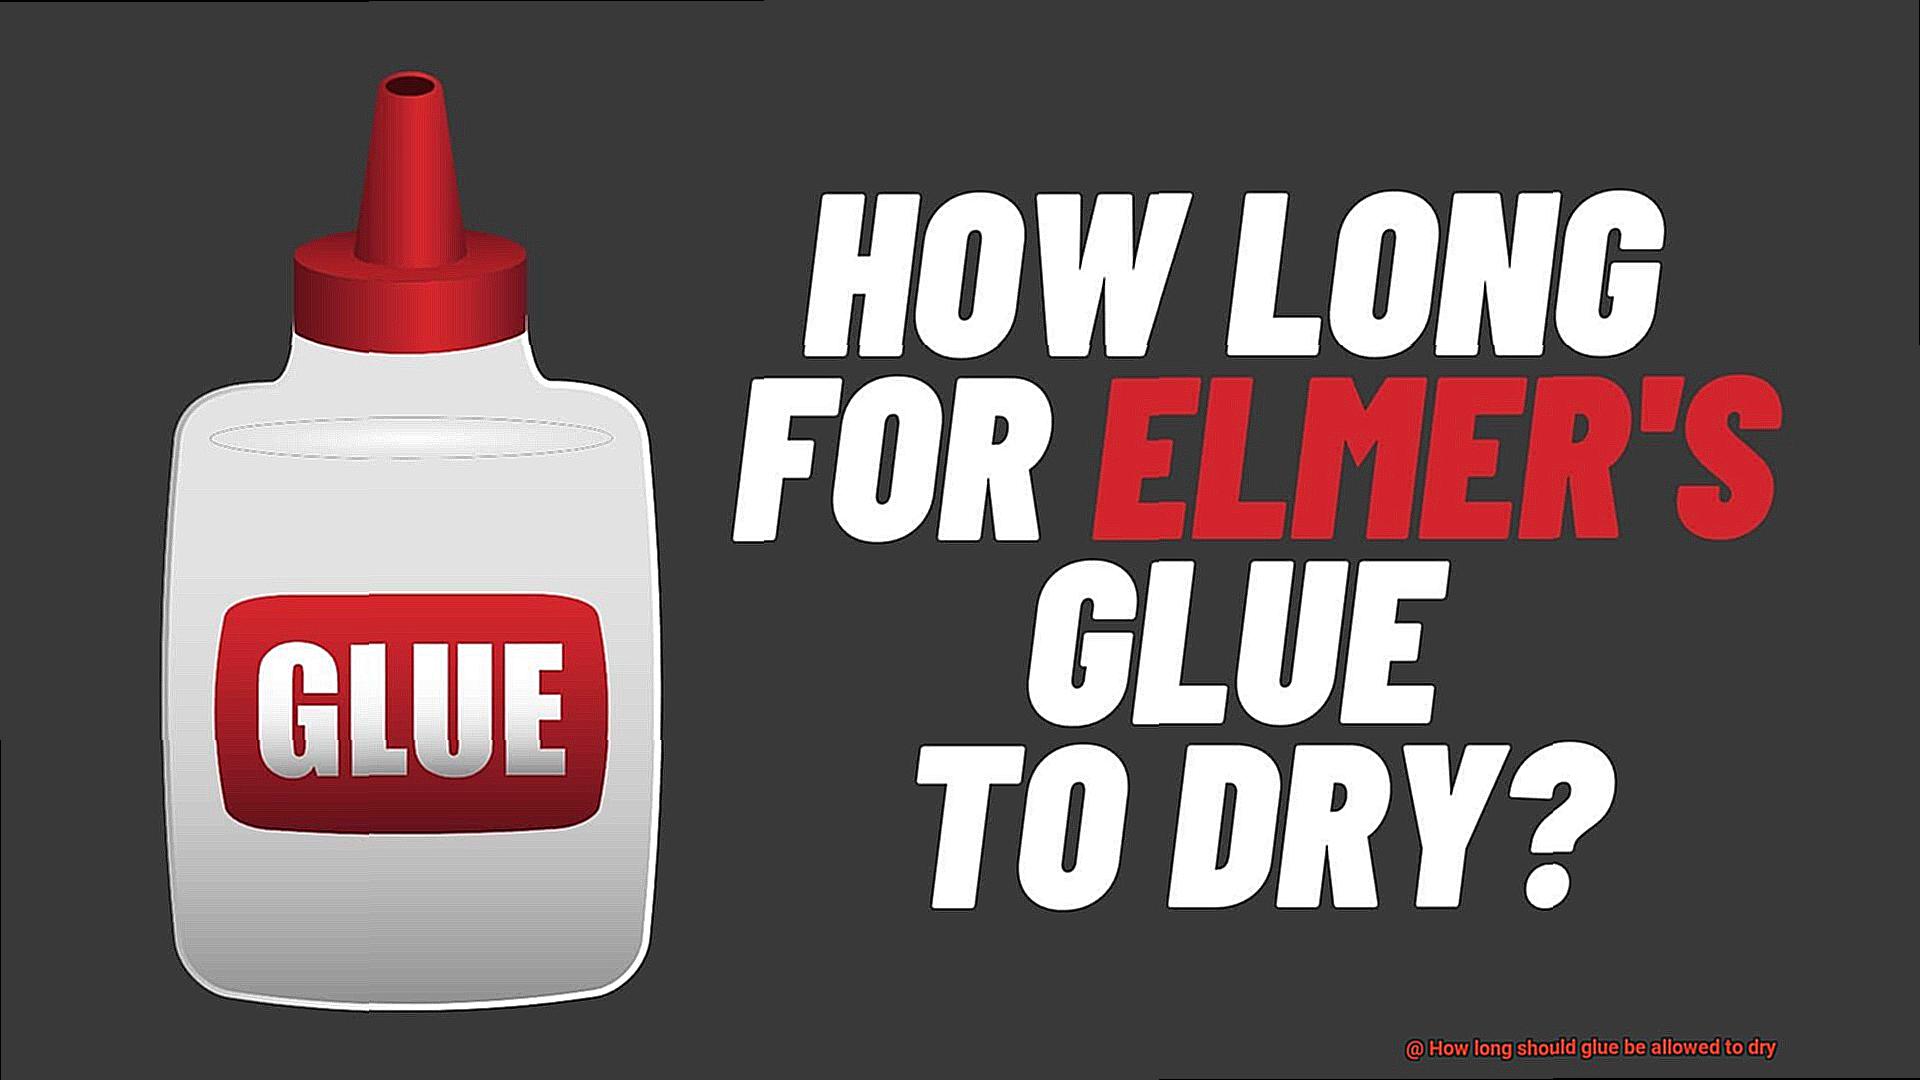 How long should glue be allowed to dry-2